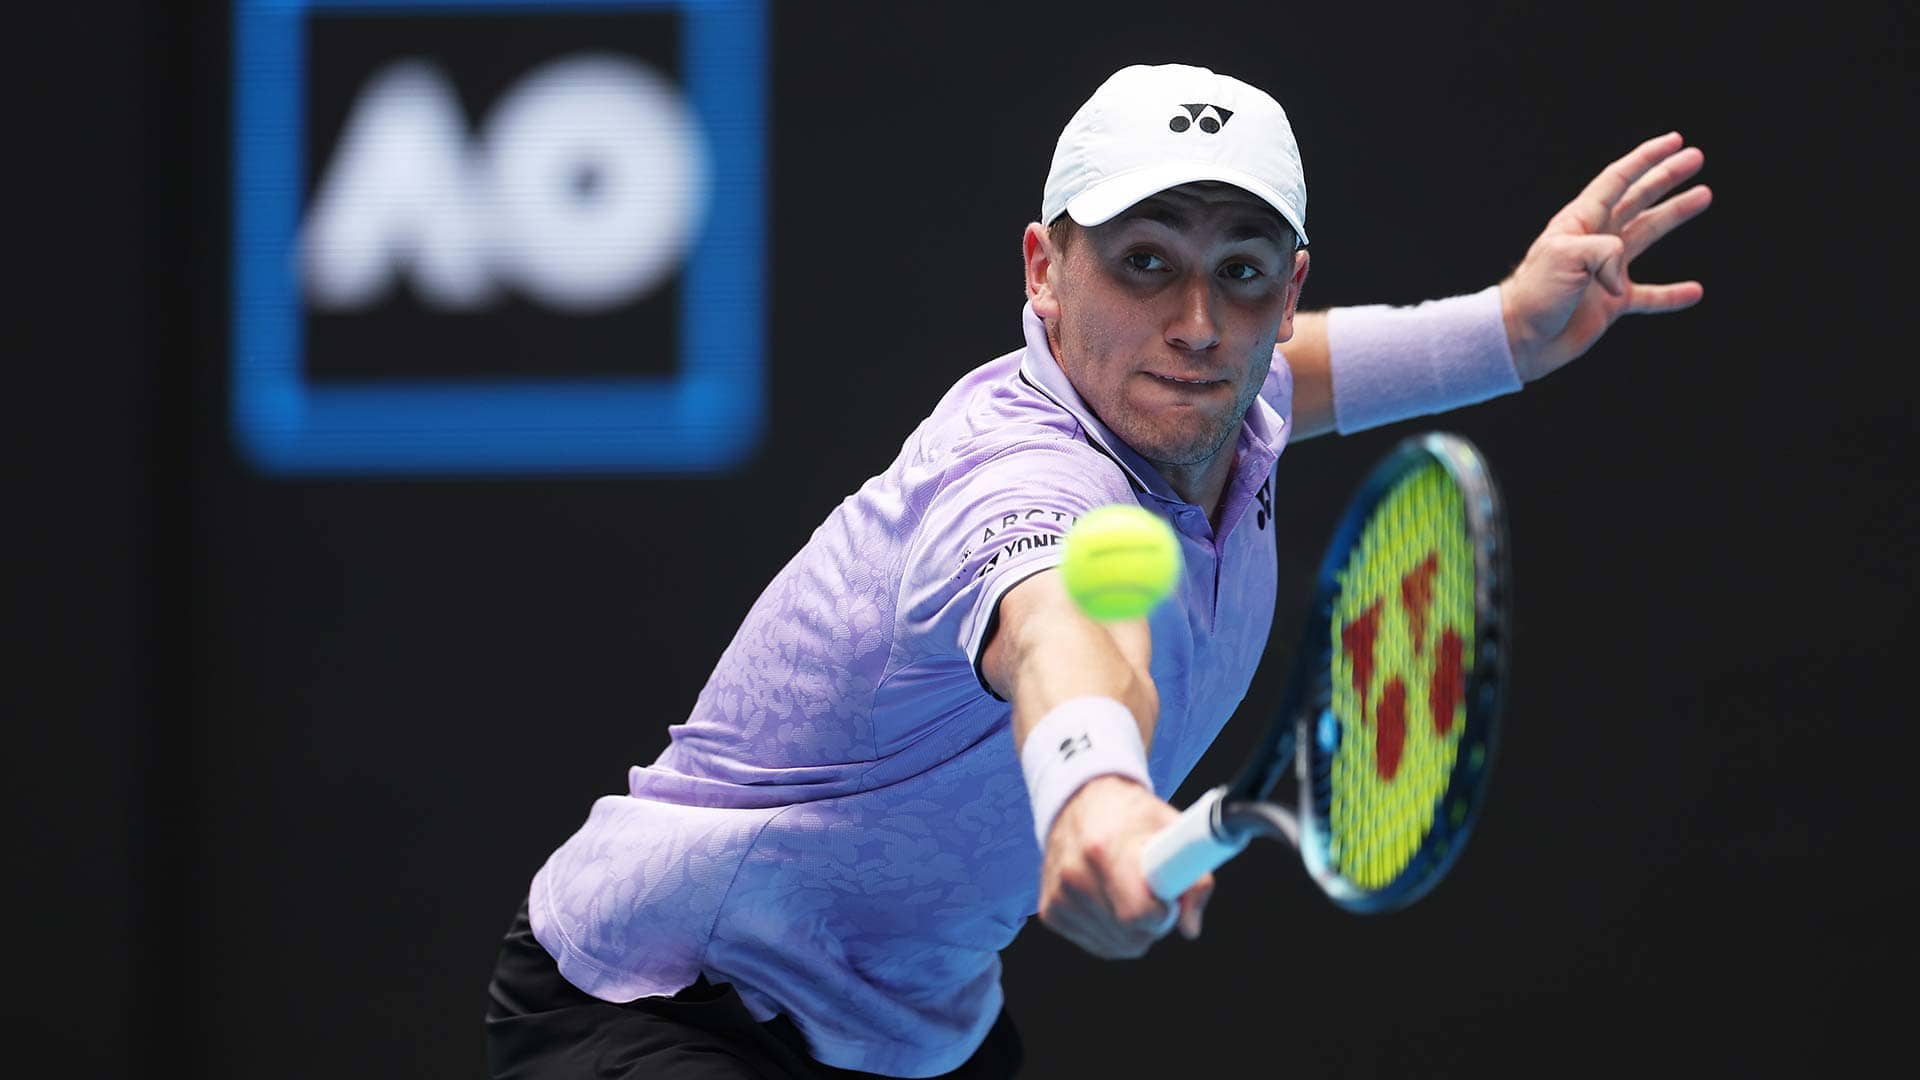 Casper Ruud in action against Jenson Brooksby on Thursday in Melbourne.